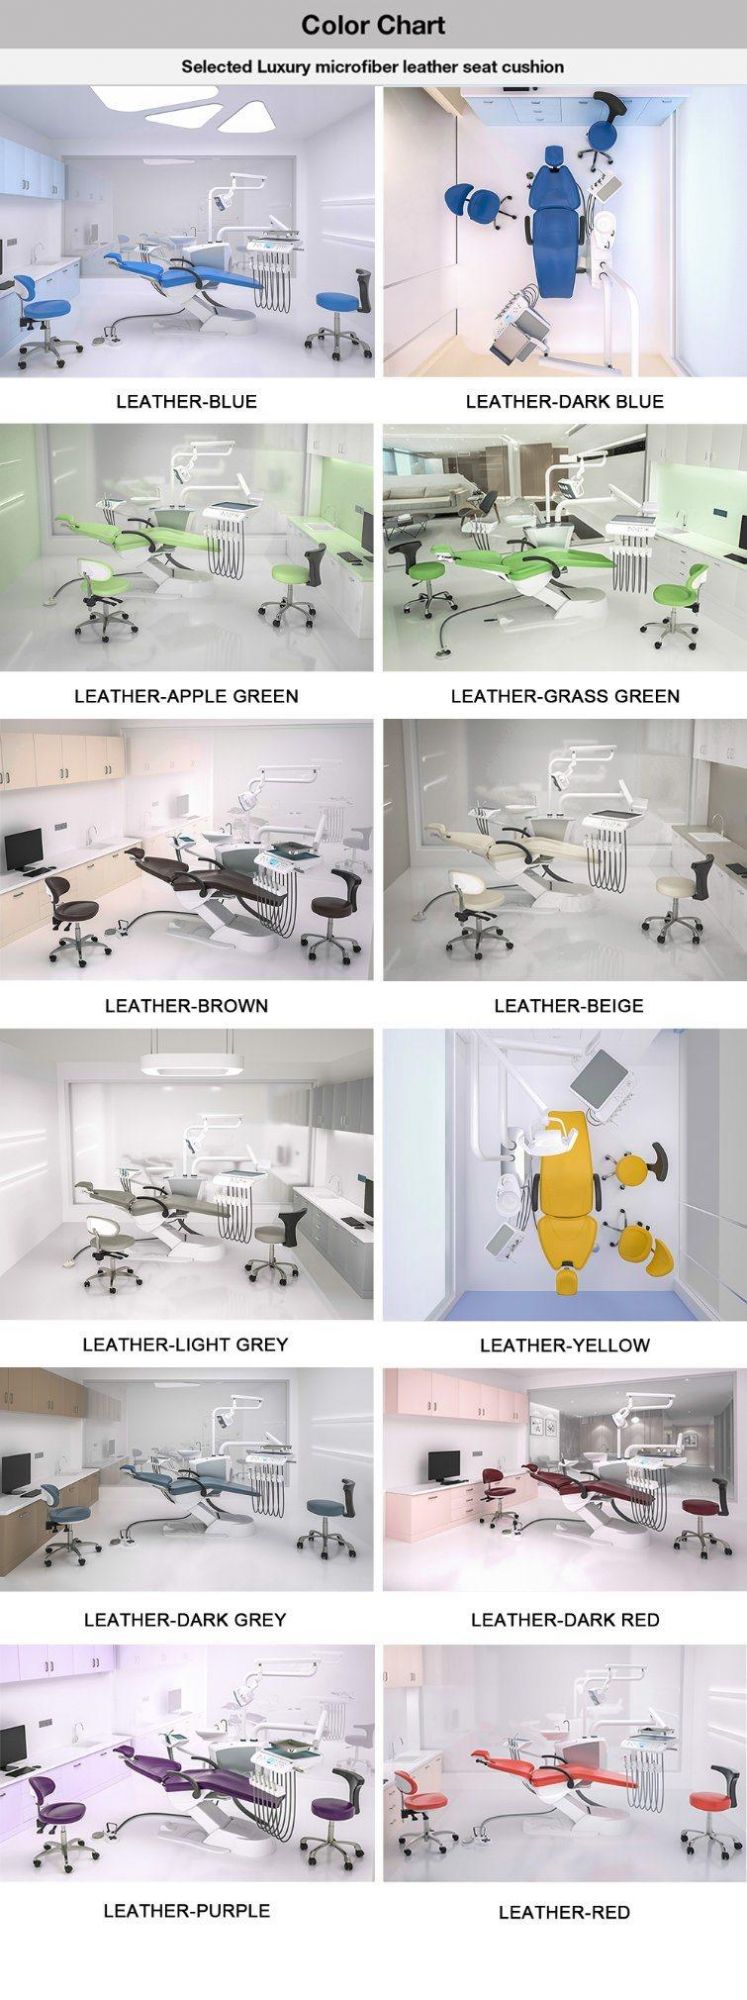 Luxury Imported Sensor LED Lamp Upgrade Safety Anti-Collision Design Dental Chair